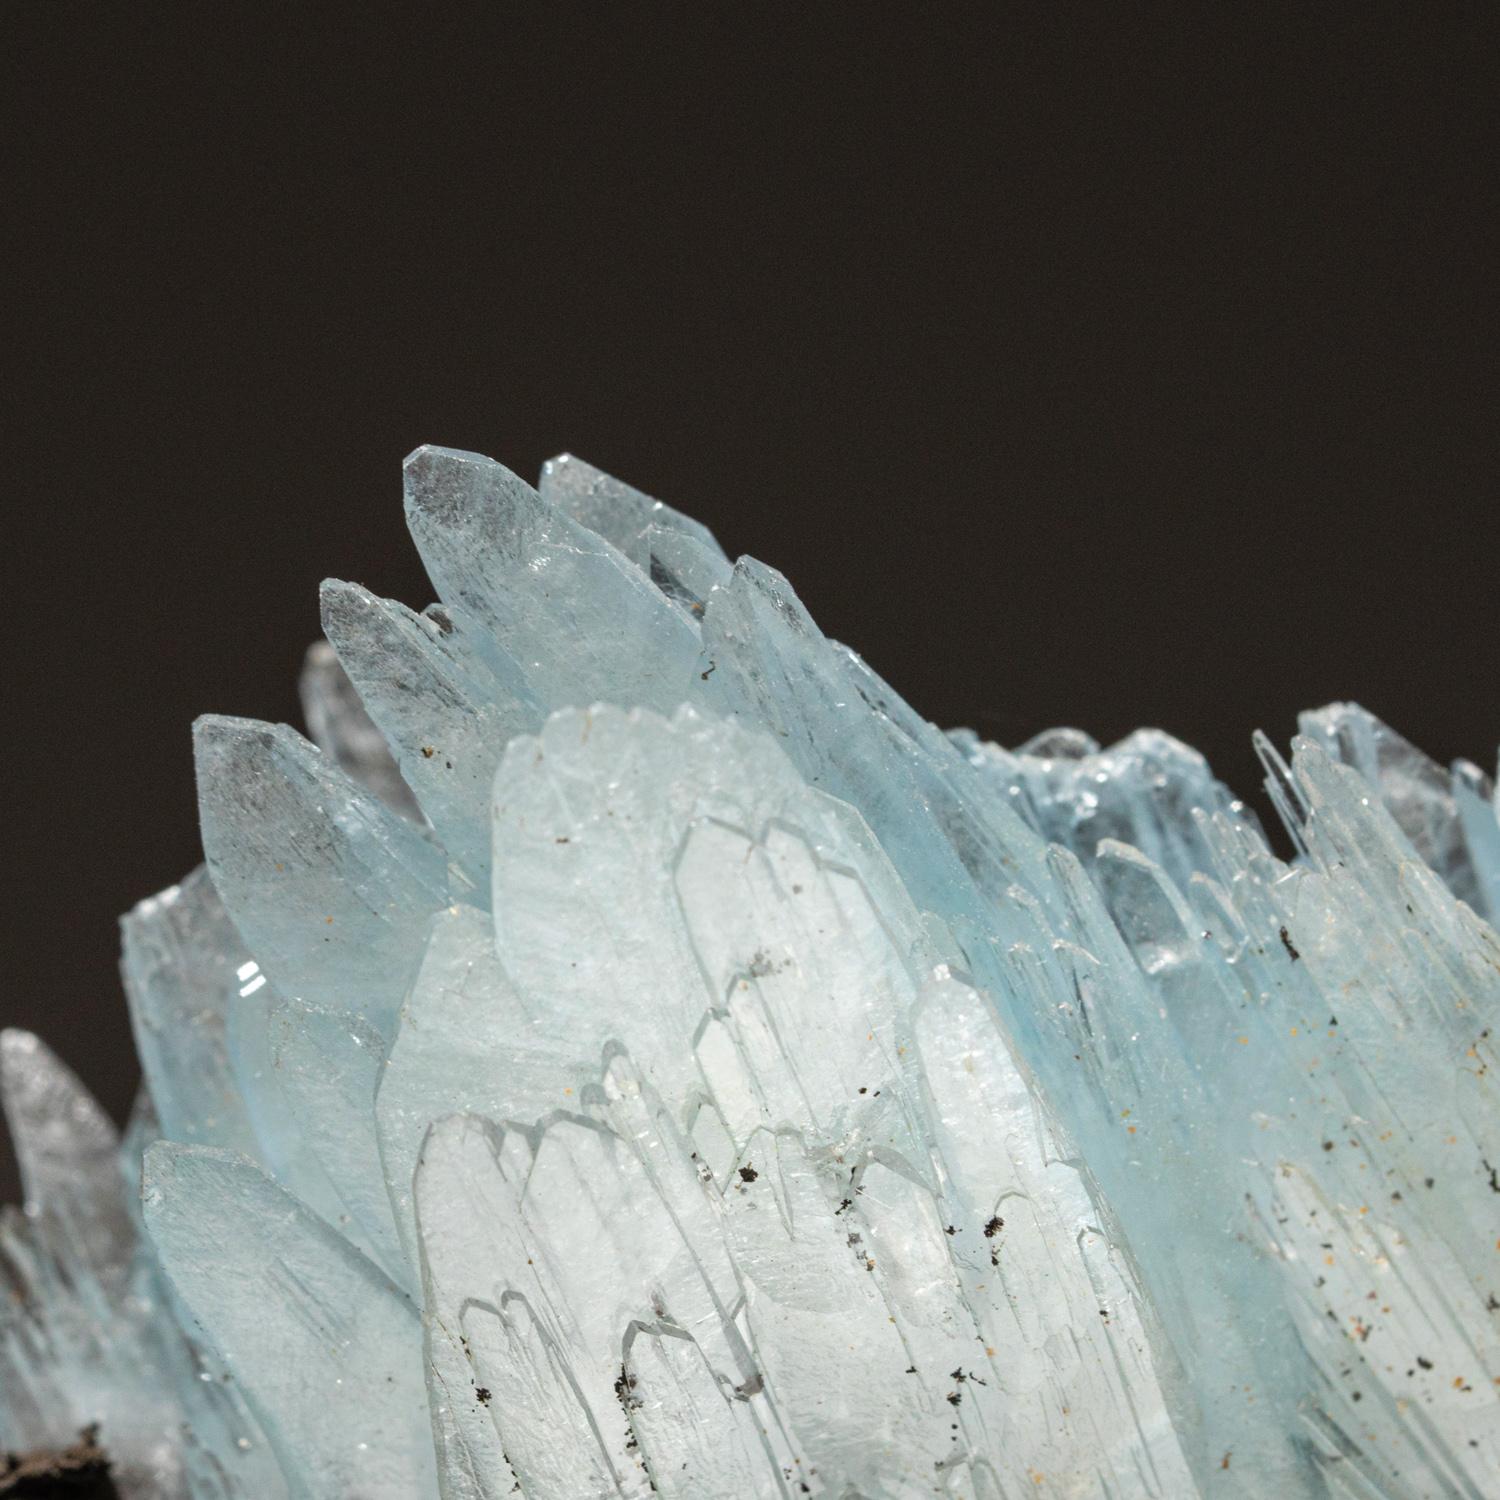 From Jebel Ouichane, Beni Bou Ifrour, Nador, Nador Province, Oriental Region, Morocco

Lustrous transparent blue-gray bladed barite crystals in intersecting aggregates of subparallel crystals on geothite. The small transparent colorless barite